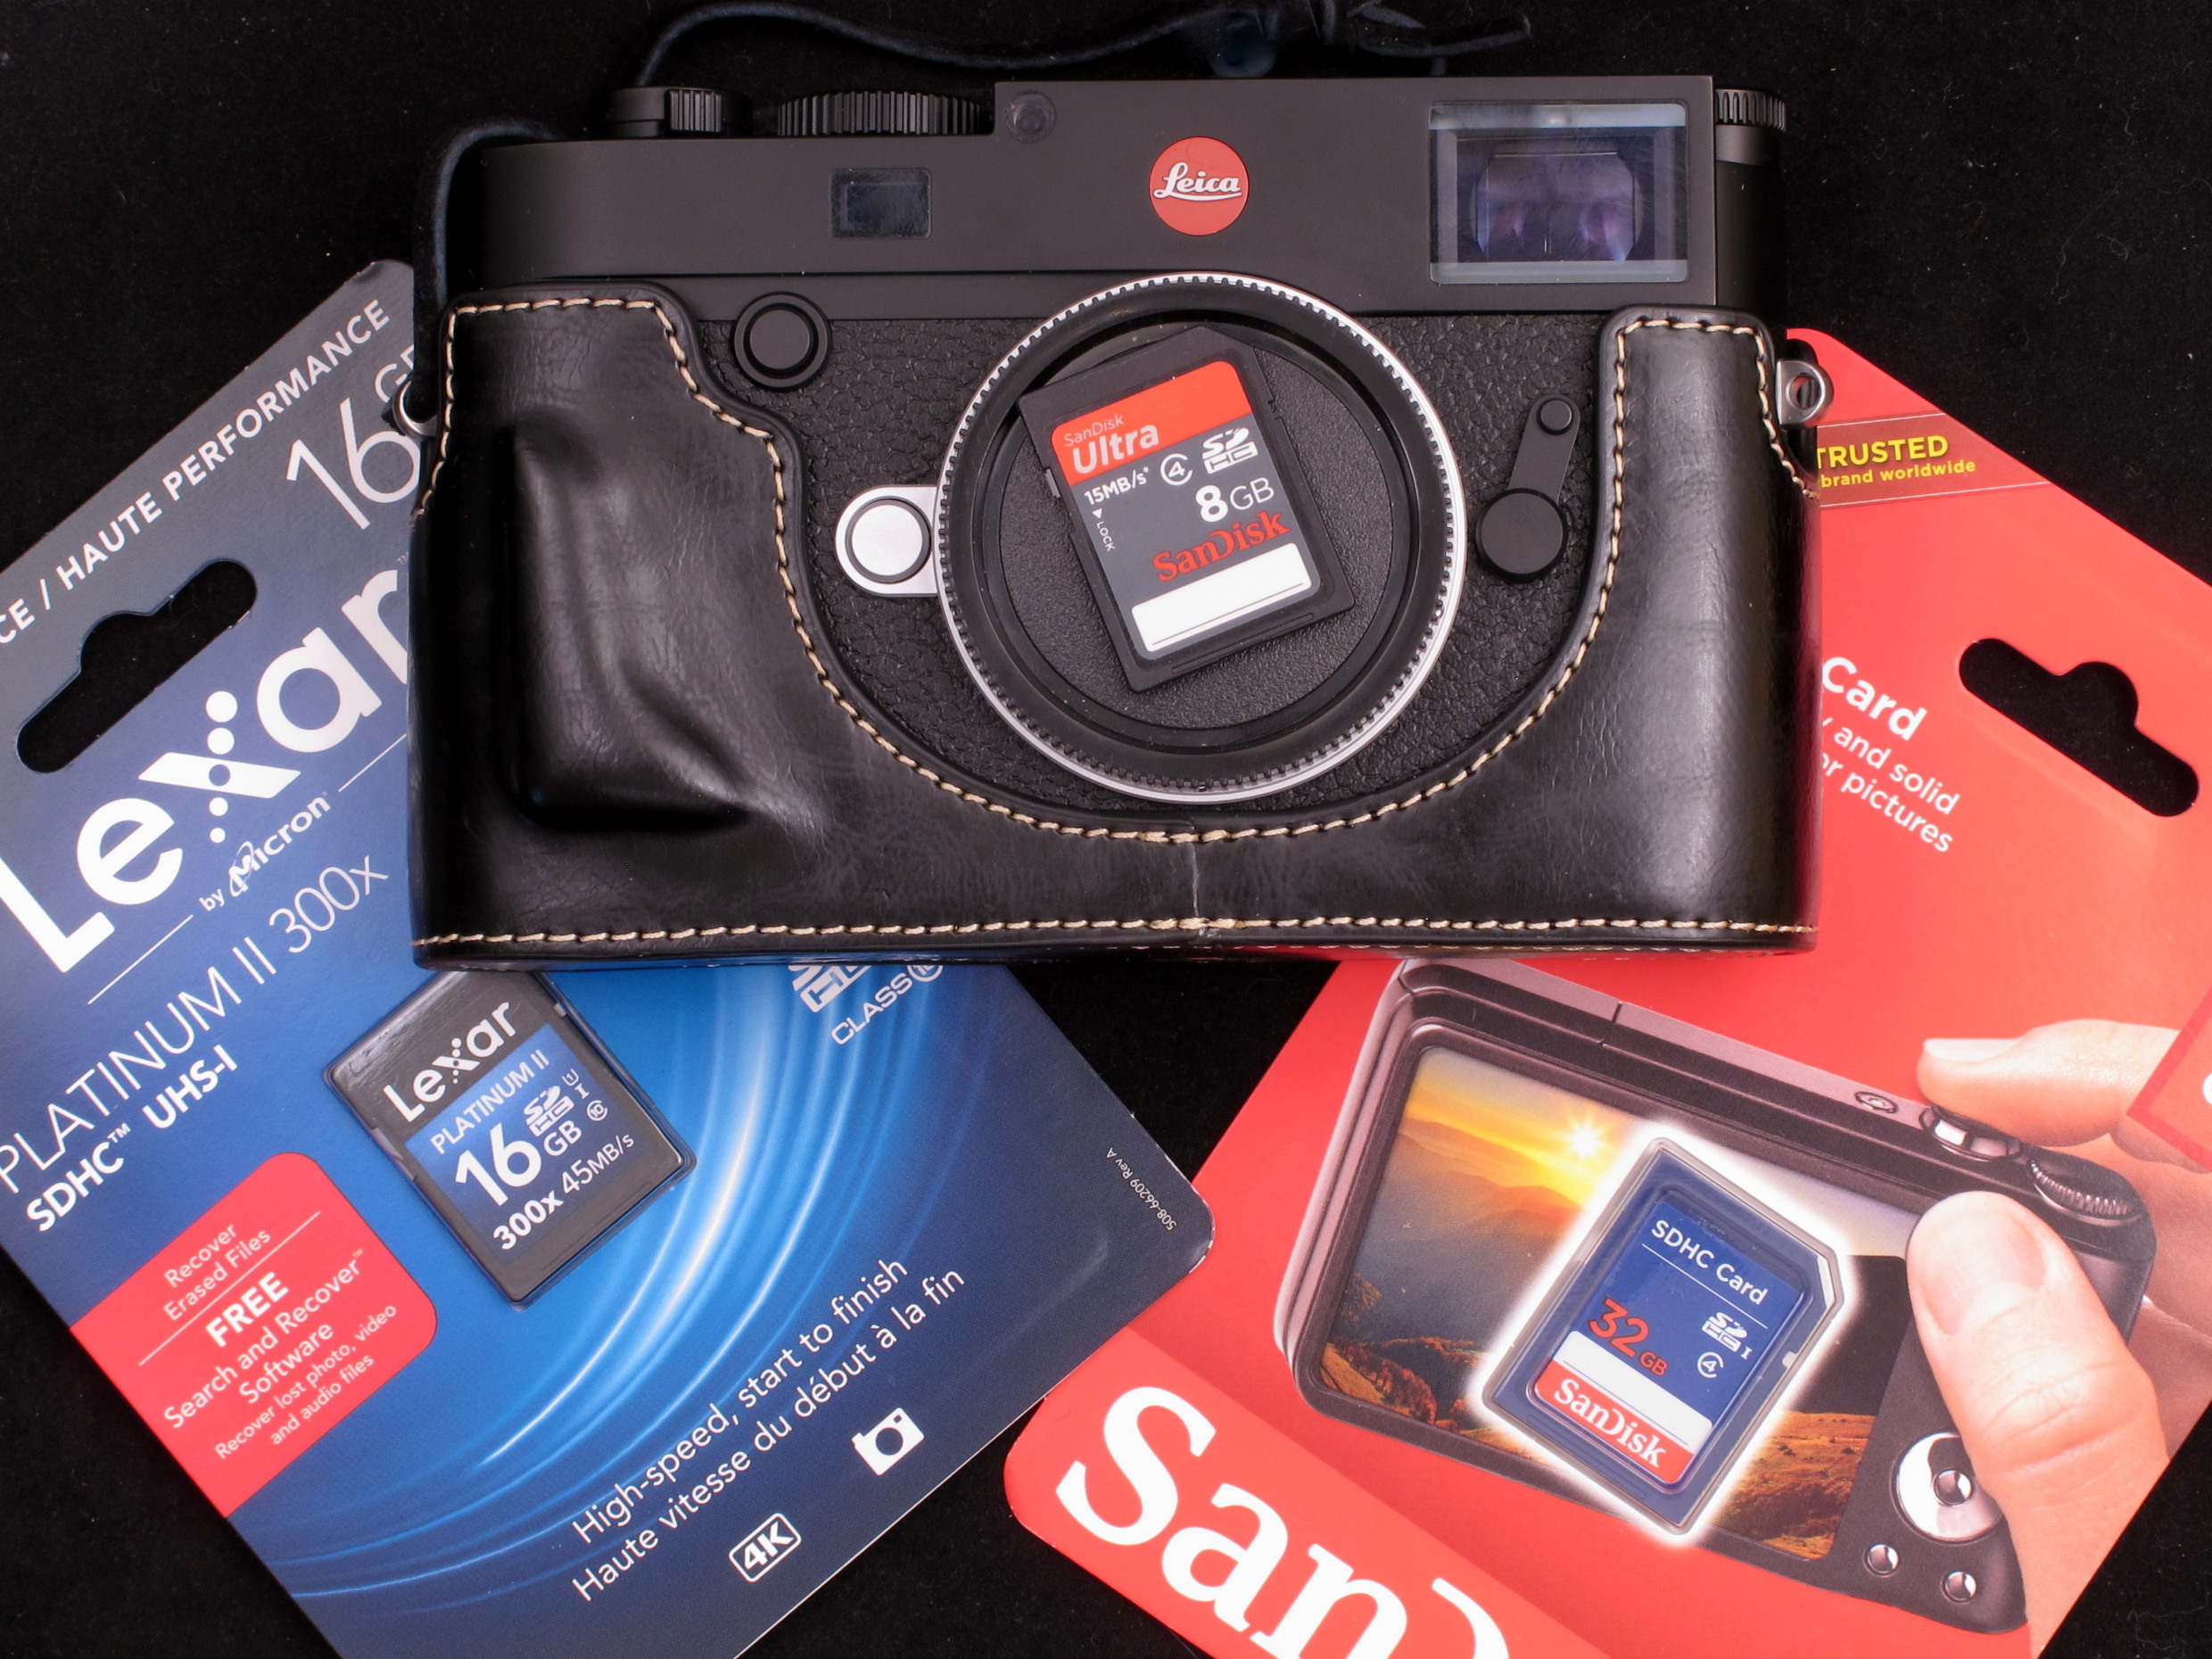 Sandisk Extreme Pro® SDHC 300mb/s UHS-II Sd Card - 32gb – Leica Official  Store Singapore